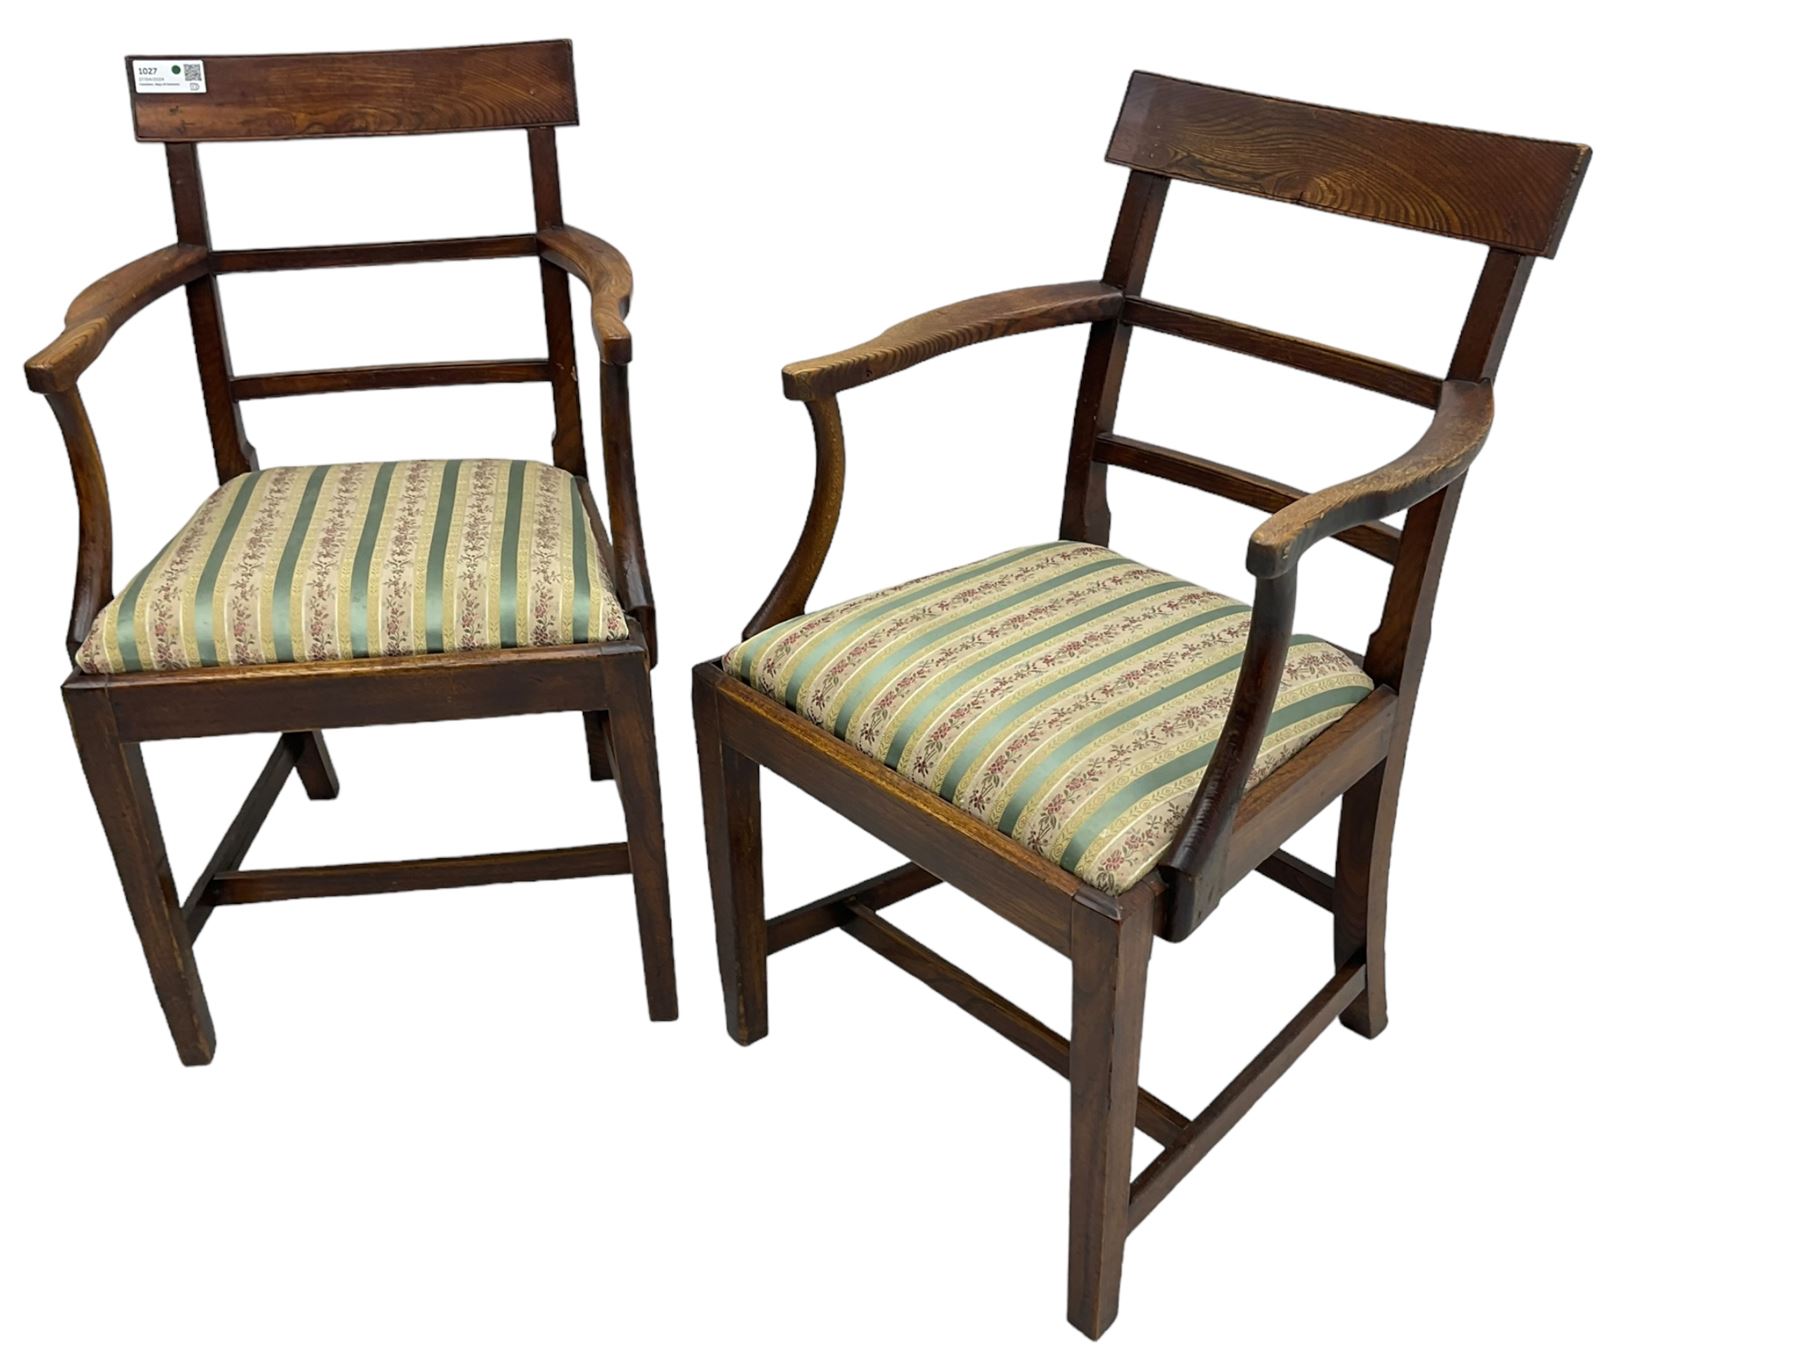 Pair of 19th century elm elbow chairs - Image 3 of 7